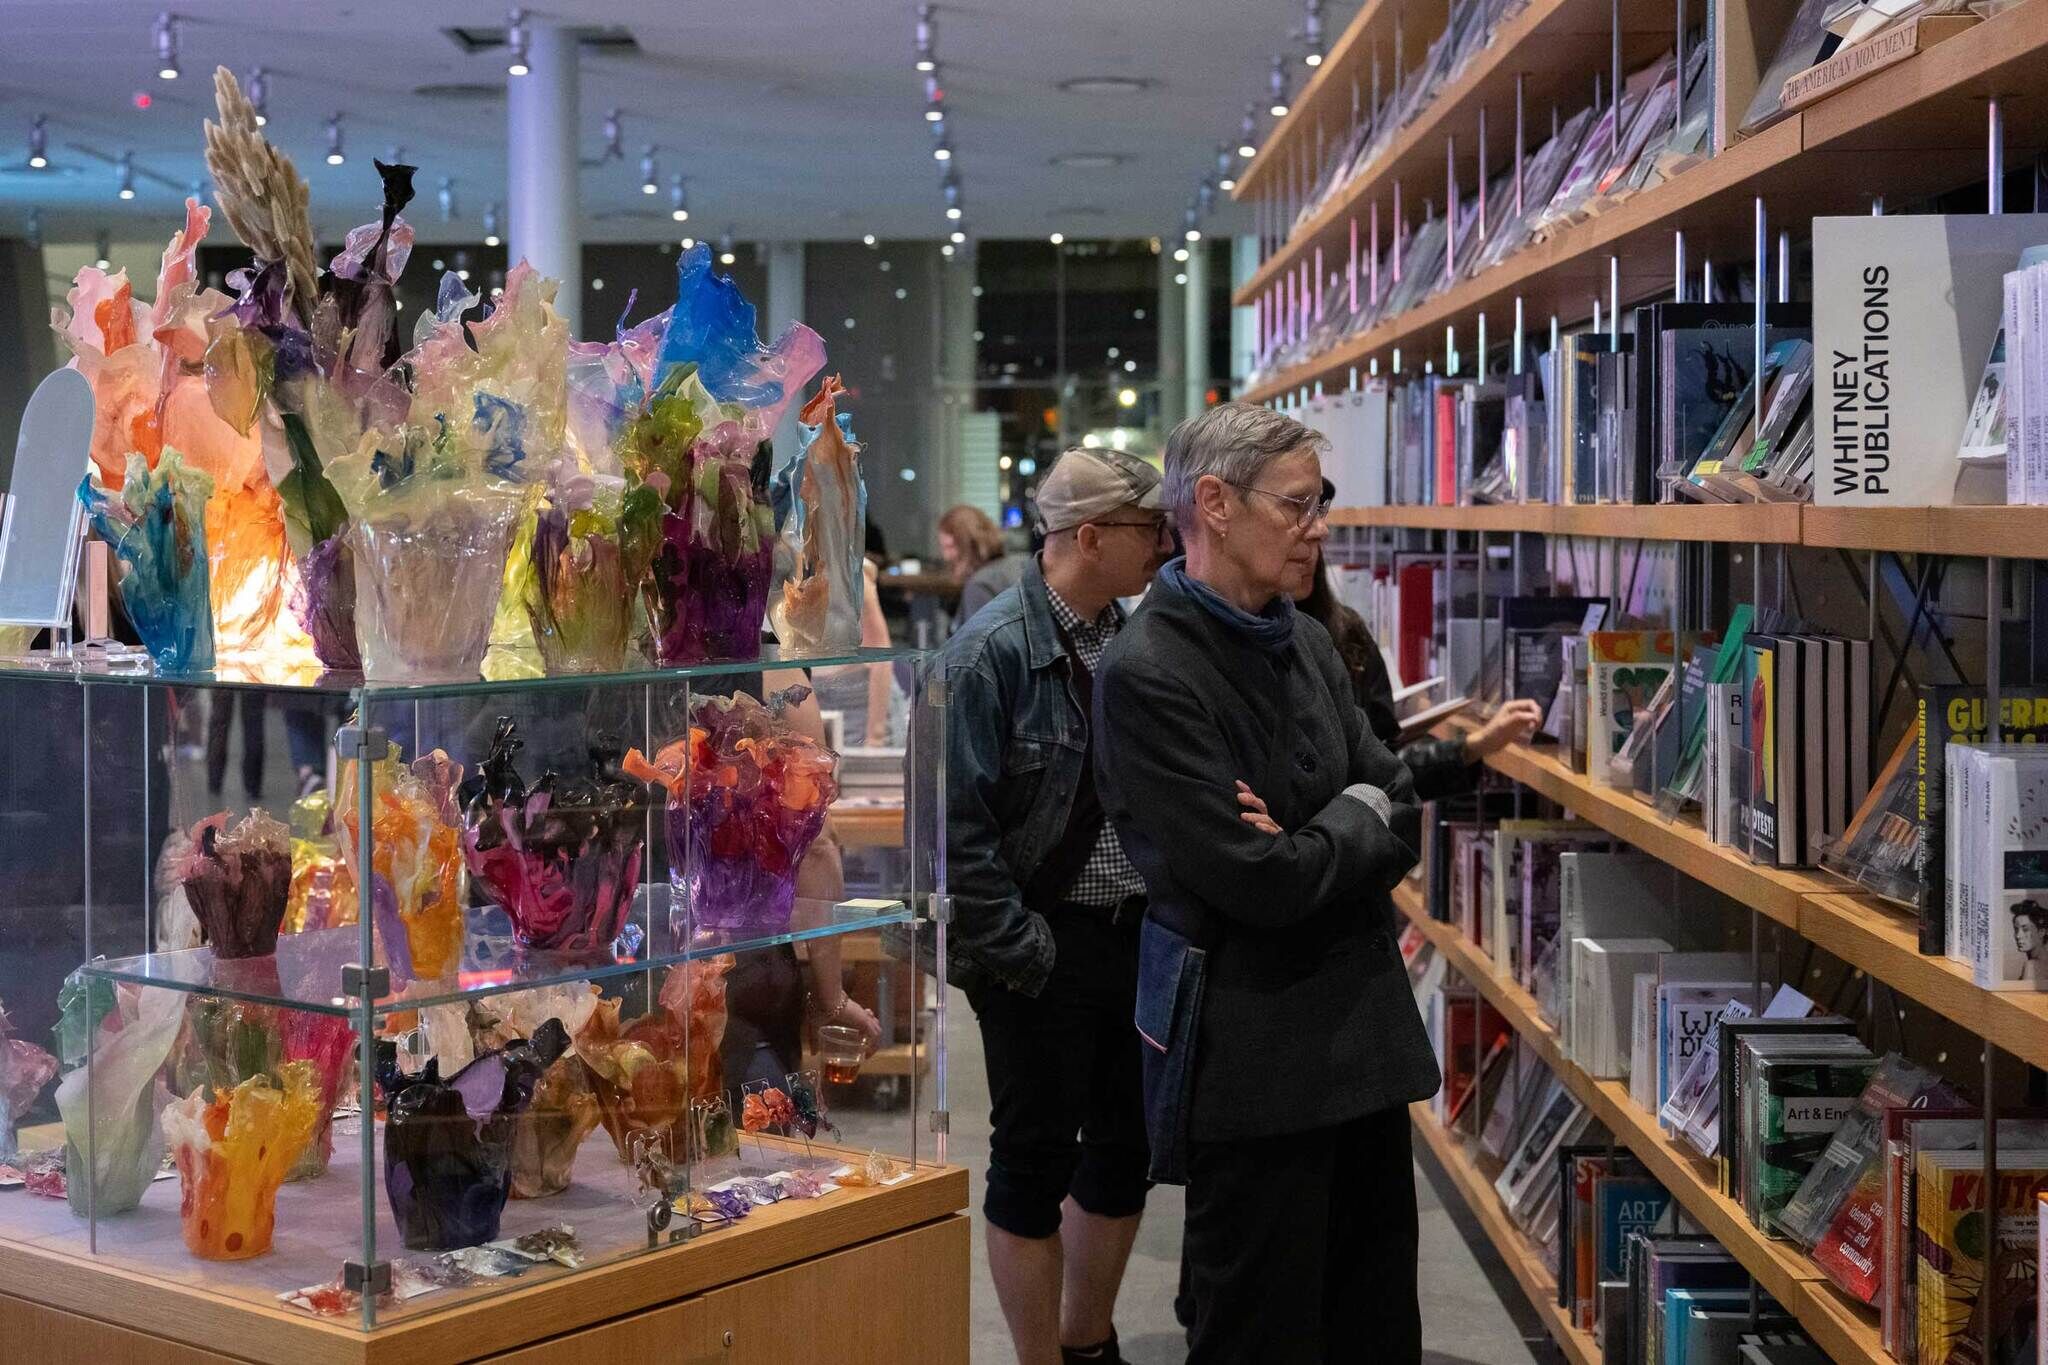 People stand looking at bookshelves in the Whitney Shop. Next to them, is a display of colorful glass vases on clear shelves.